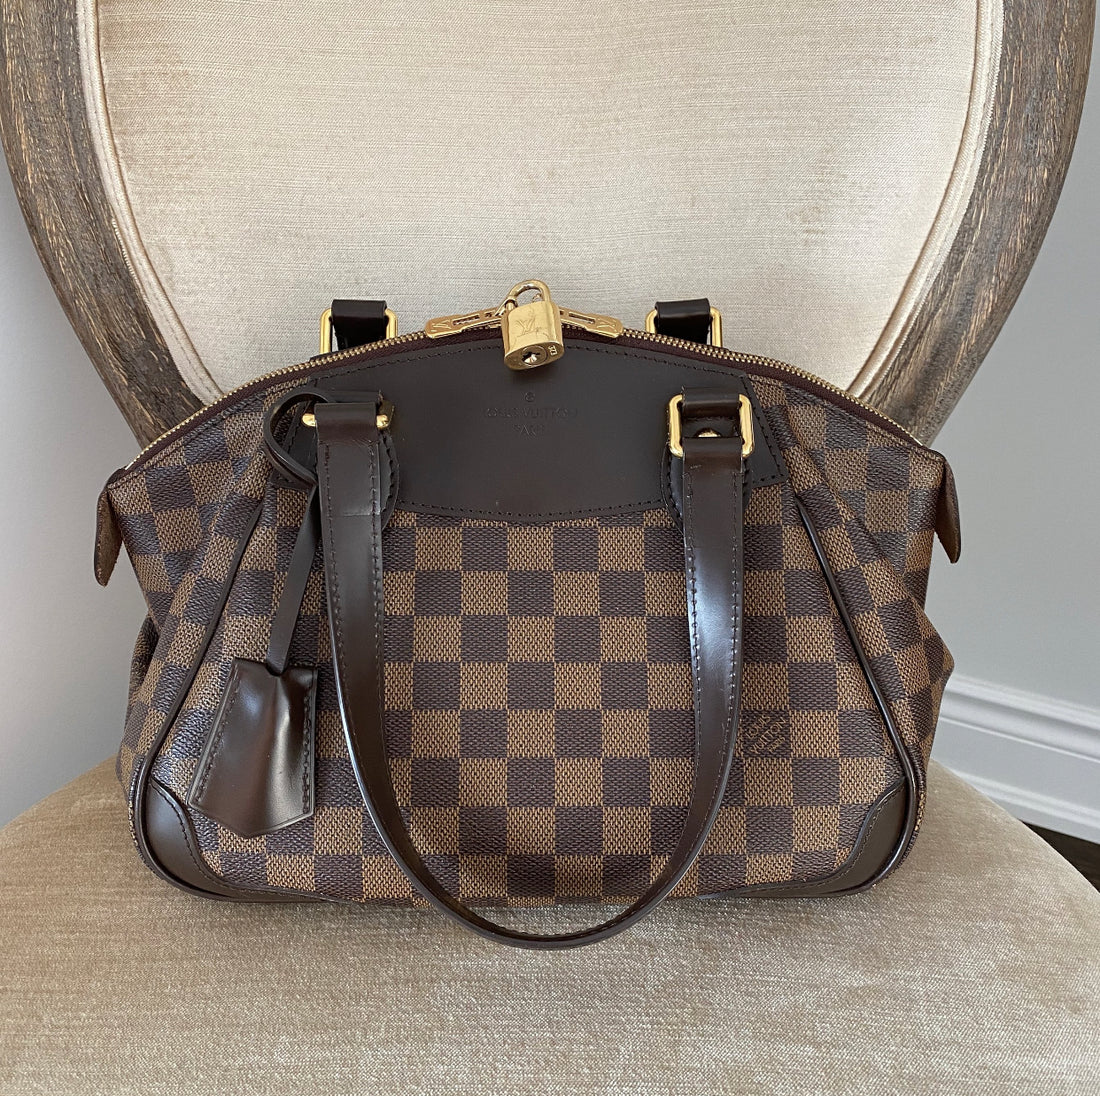 LV Verona PM tote in Damier Even leather - made in 2011 & now